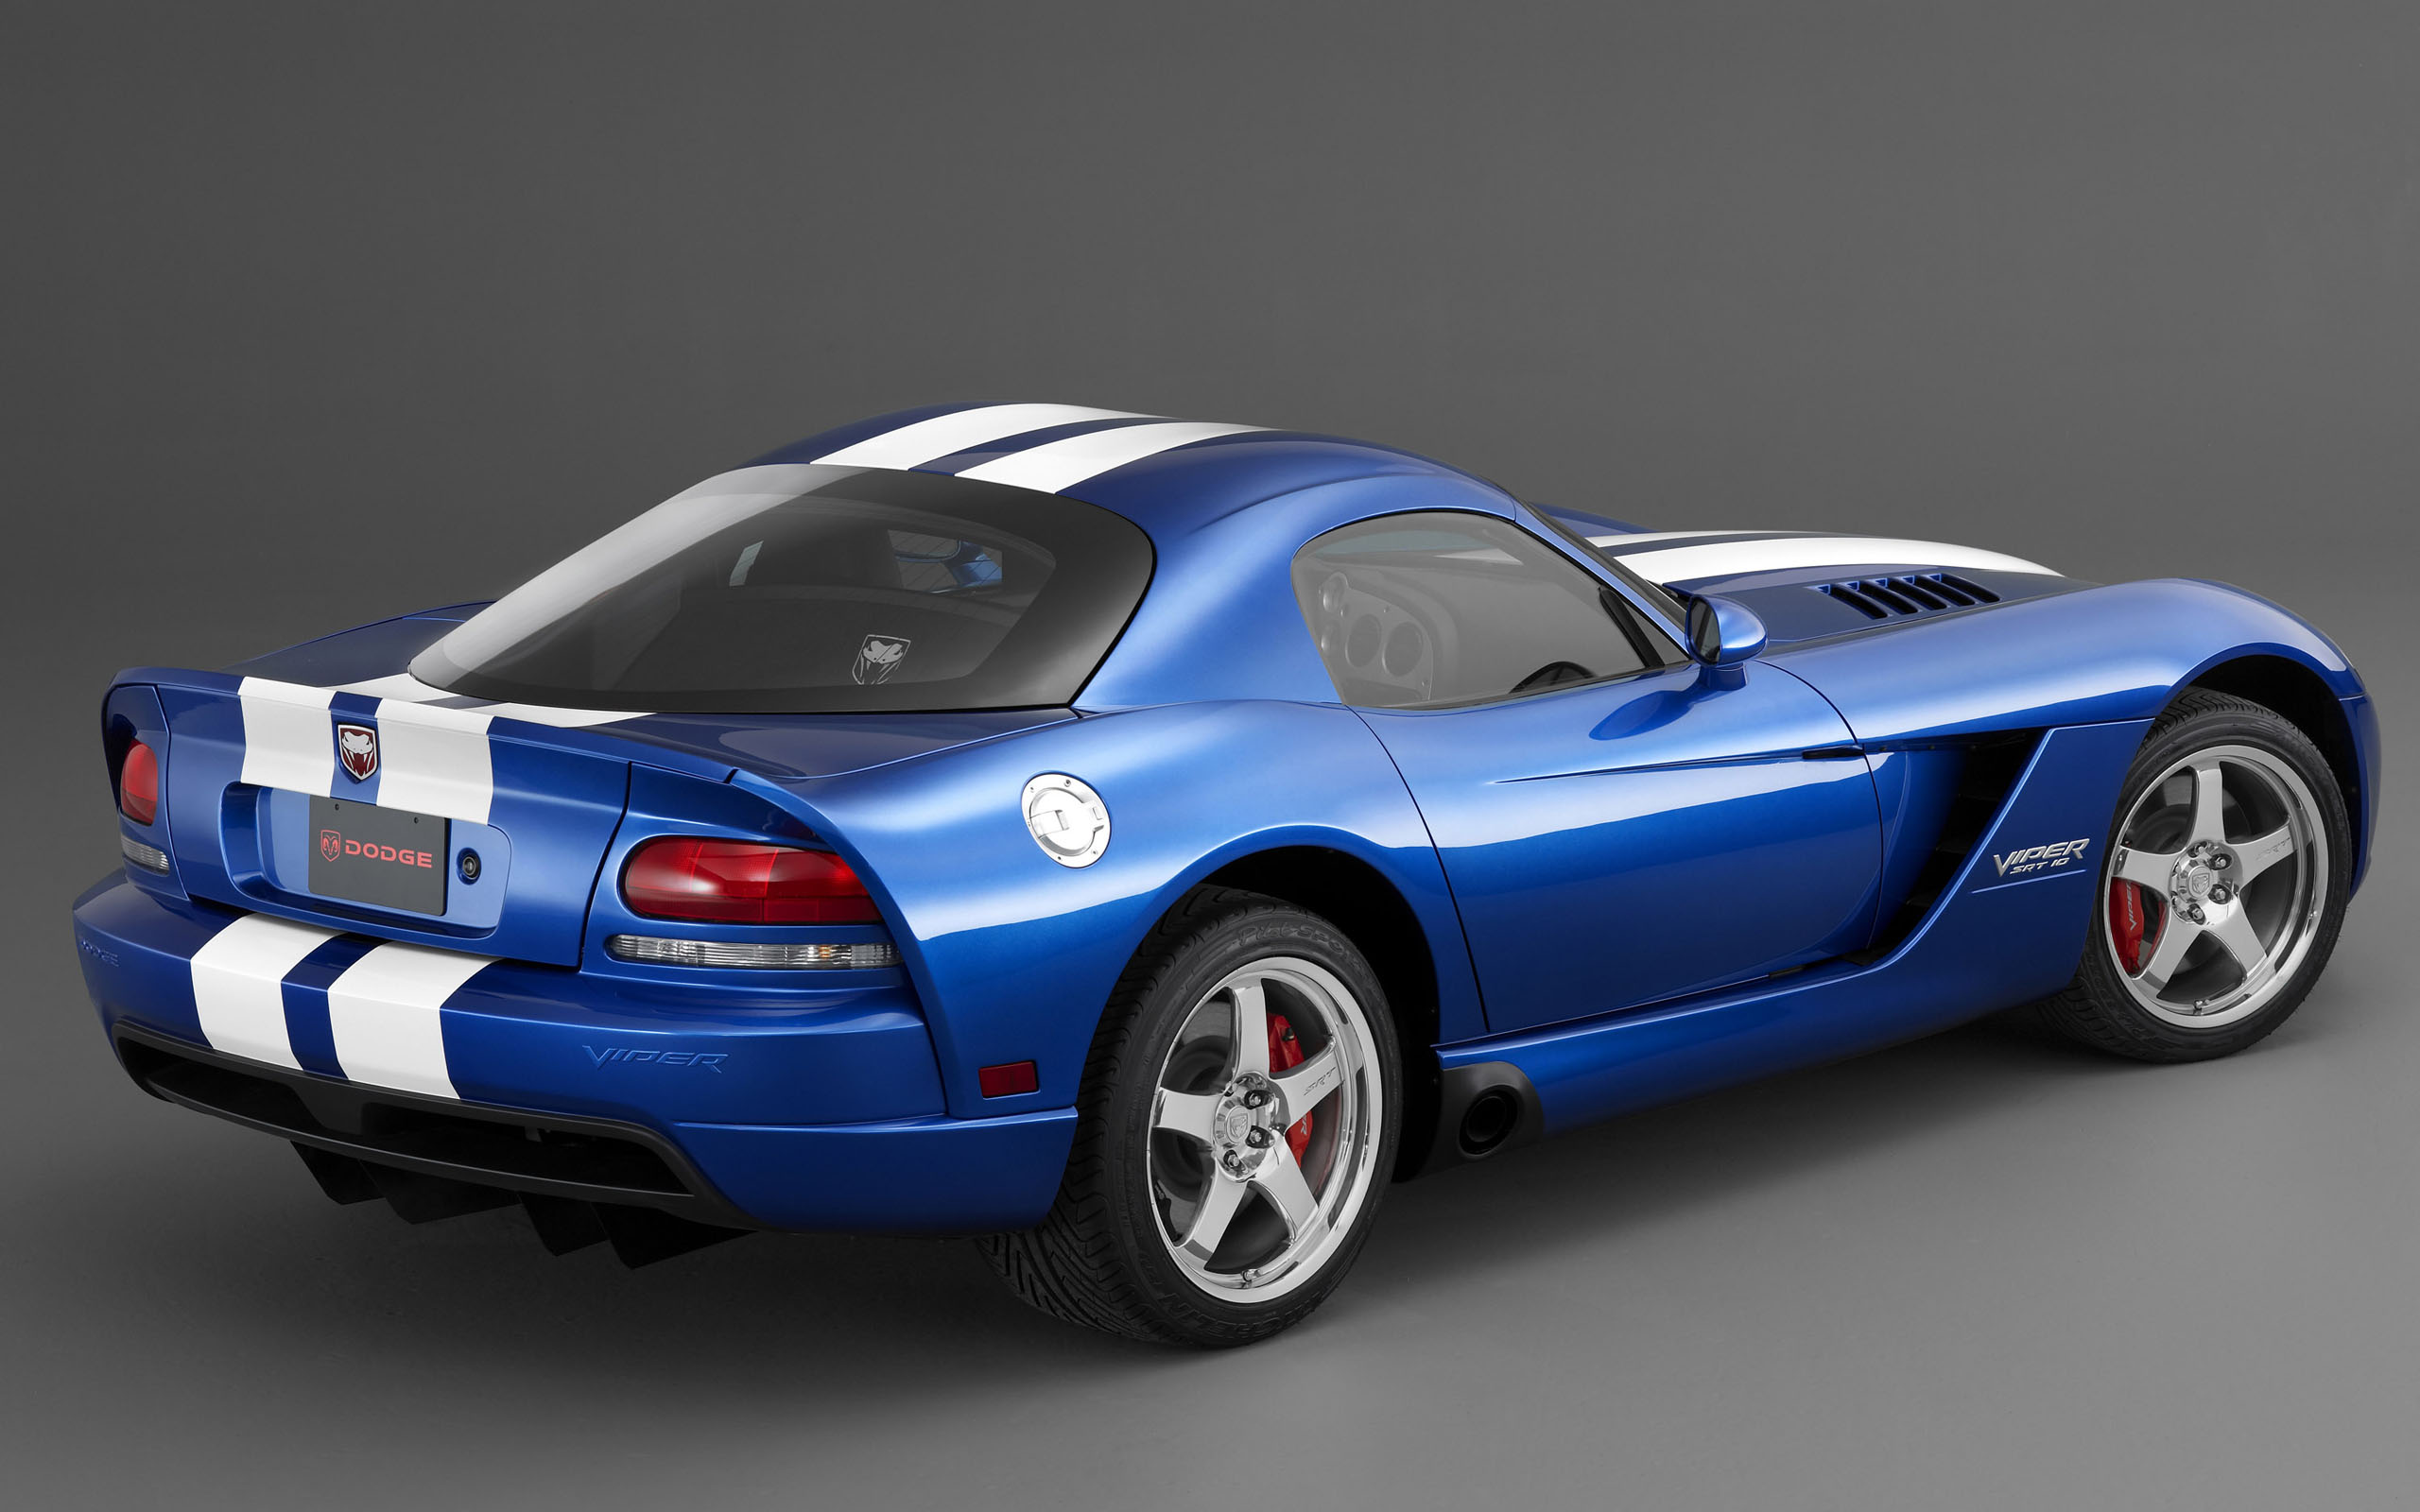 Dodge Viper Coupe: Best Images Collection of Dodge Viper Coupe